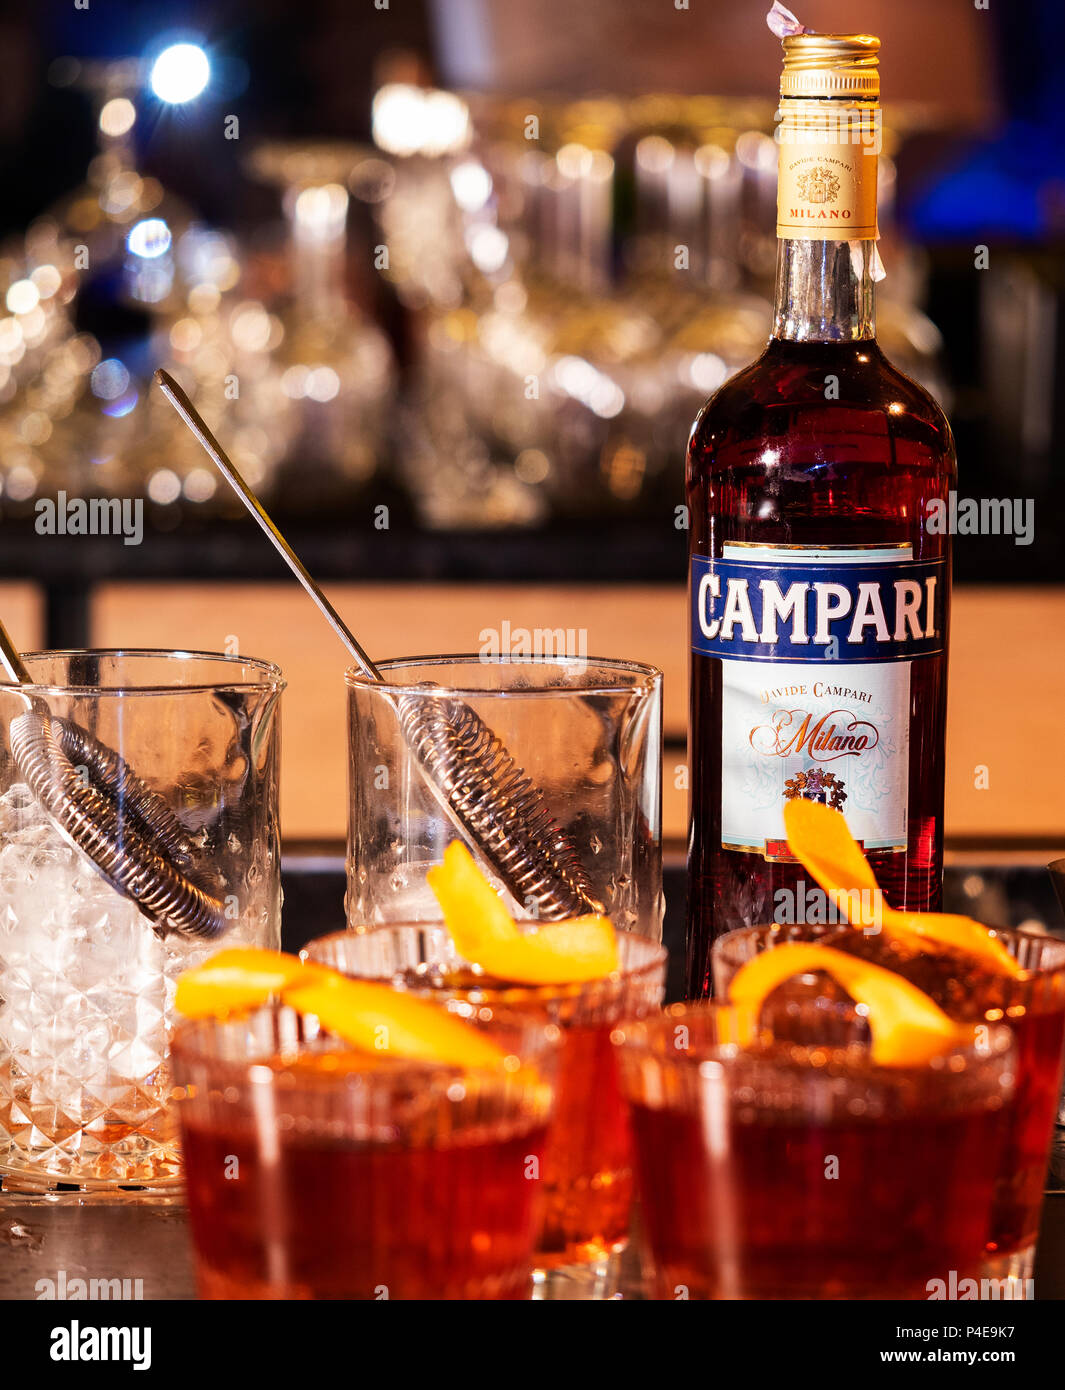 KIEV, UKRAINE - June 6, 2018: Bottle of Campari, an alcoholic liqueur containing herbs and fruit (including chinotto and cascarilla), invented in 1860 Stock Photo